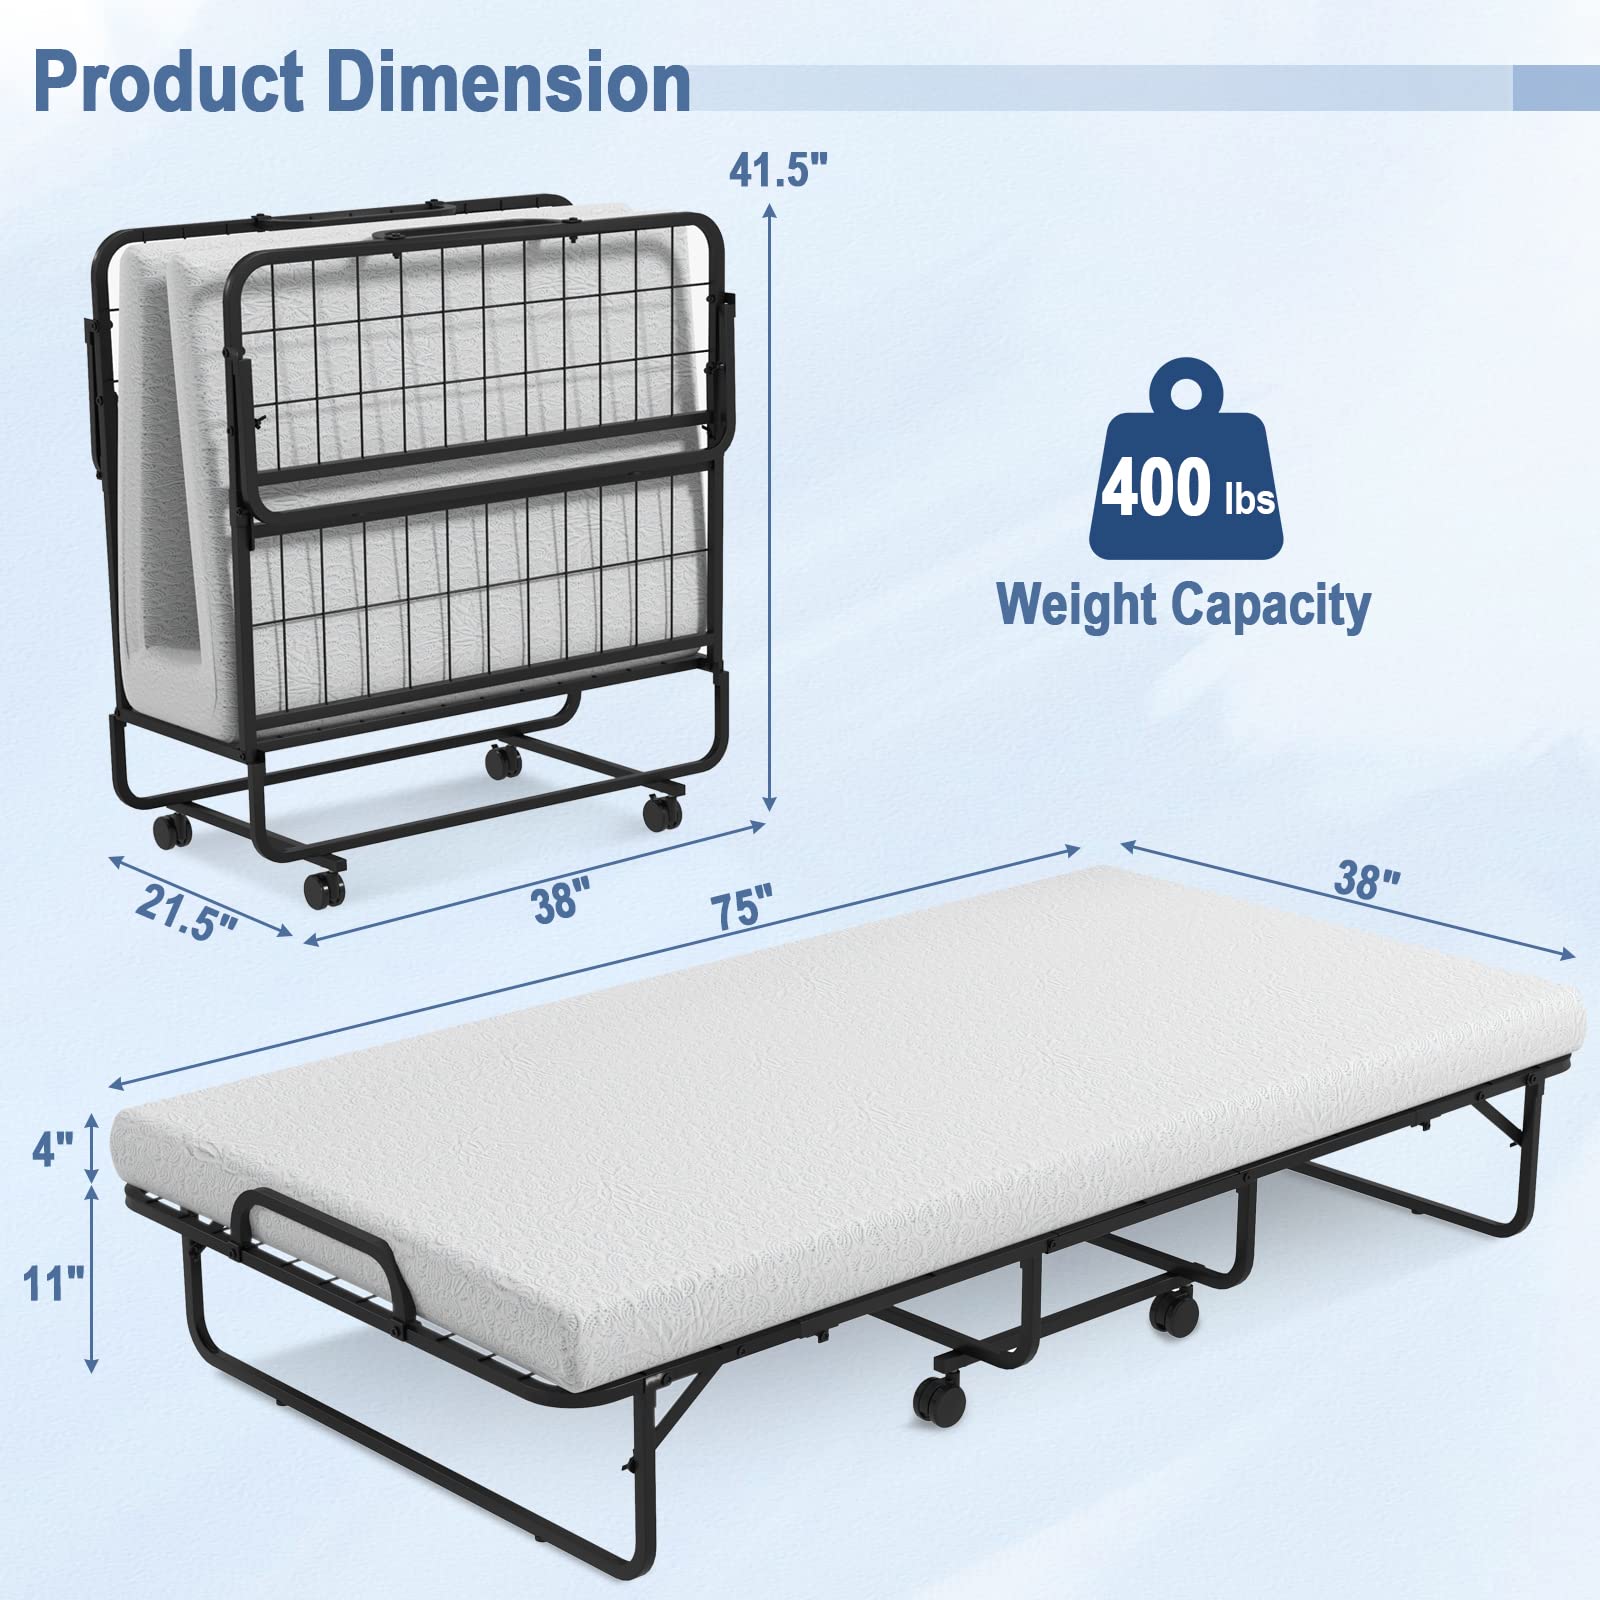 Sturdy and Durable Metal Folding Bed with Mattress